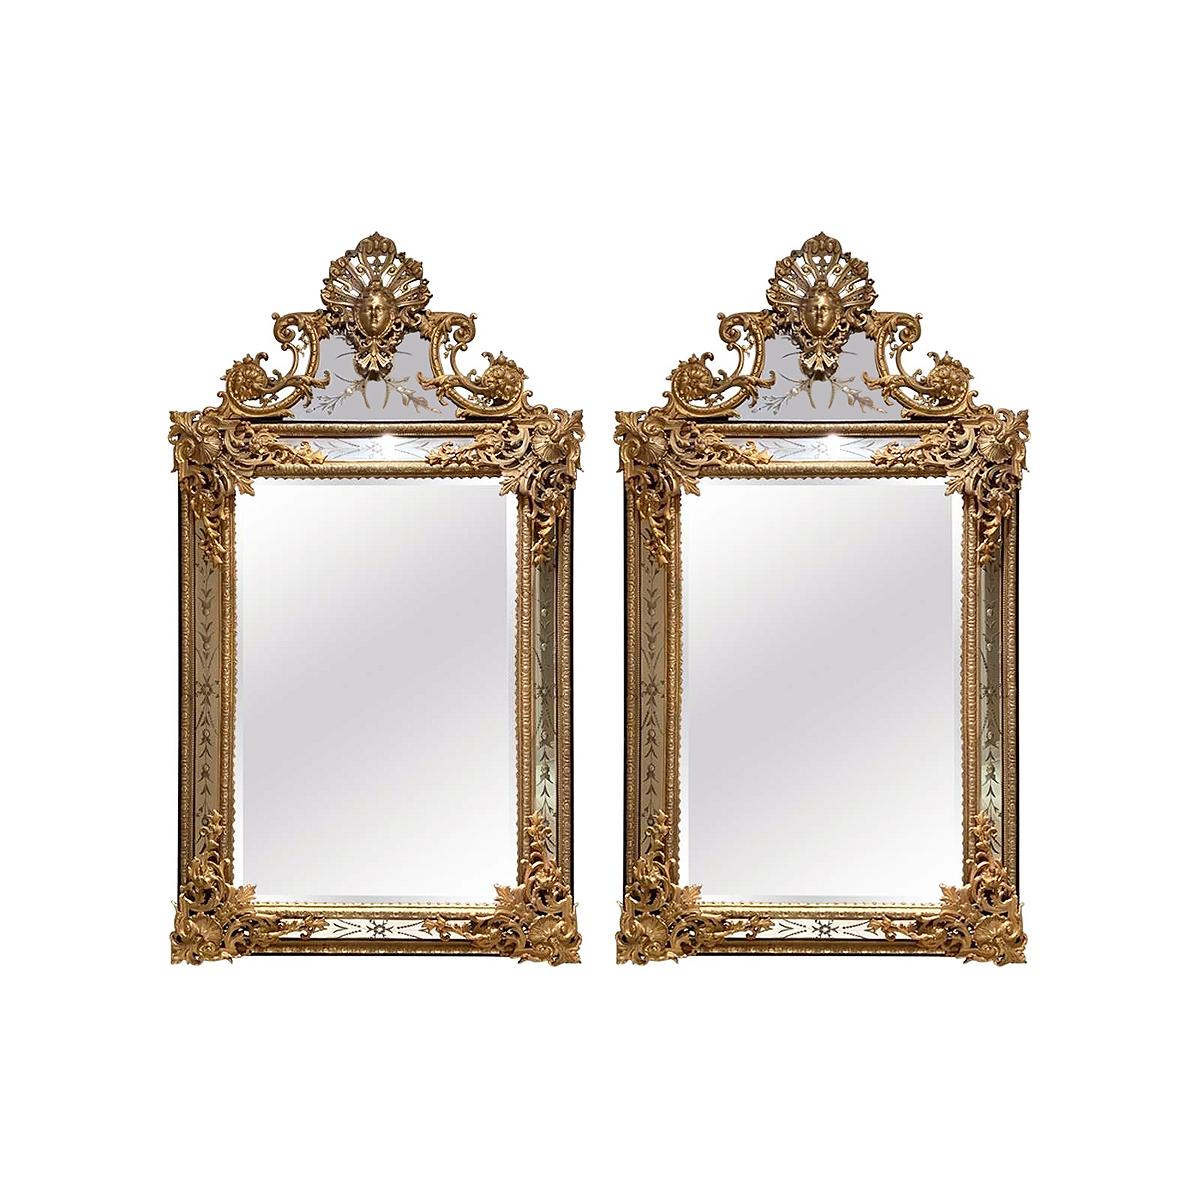 A fine pair of French 19th-20th century Louis XIV style gilt-bronze (Ormolu) mirror frames. The ornately decorated Rococo frames, each crowned with an allegorical mask of maiden flanked by a floral design with scrolls, acanthus and seashells, the